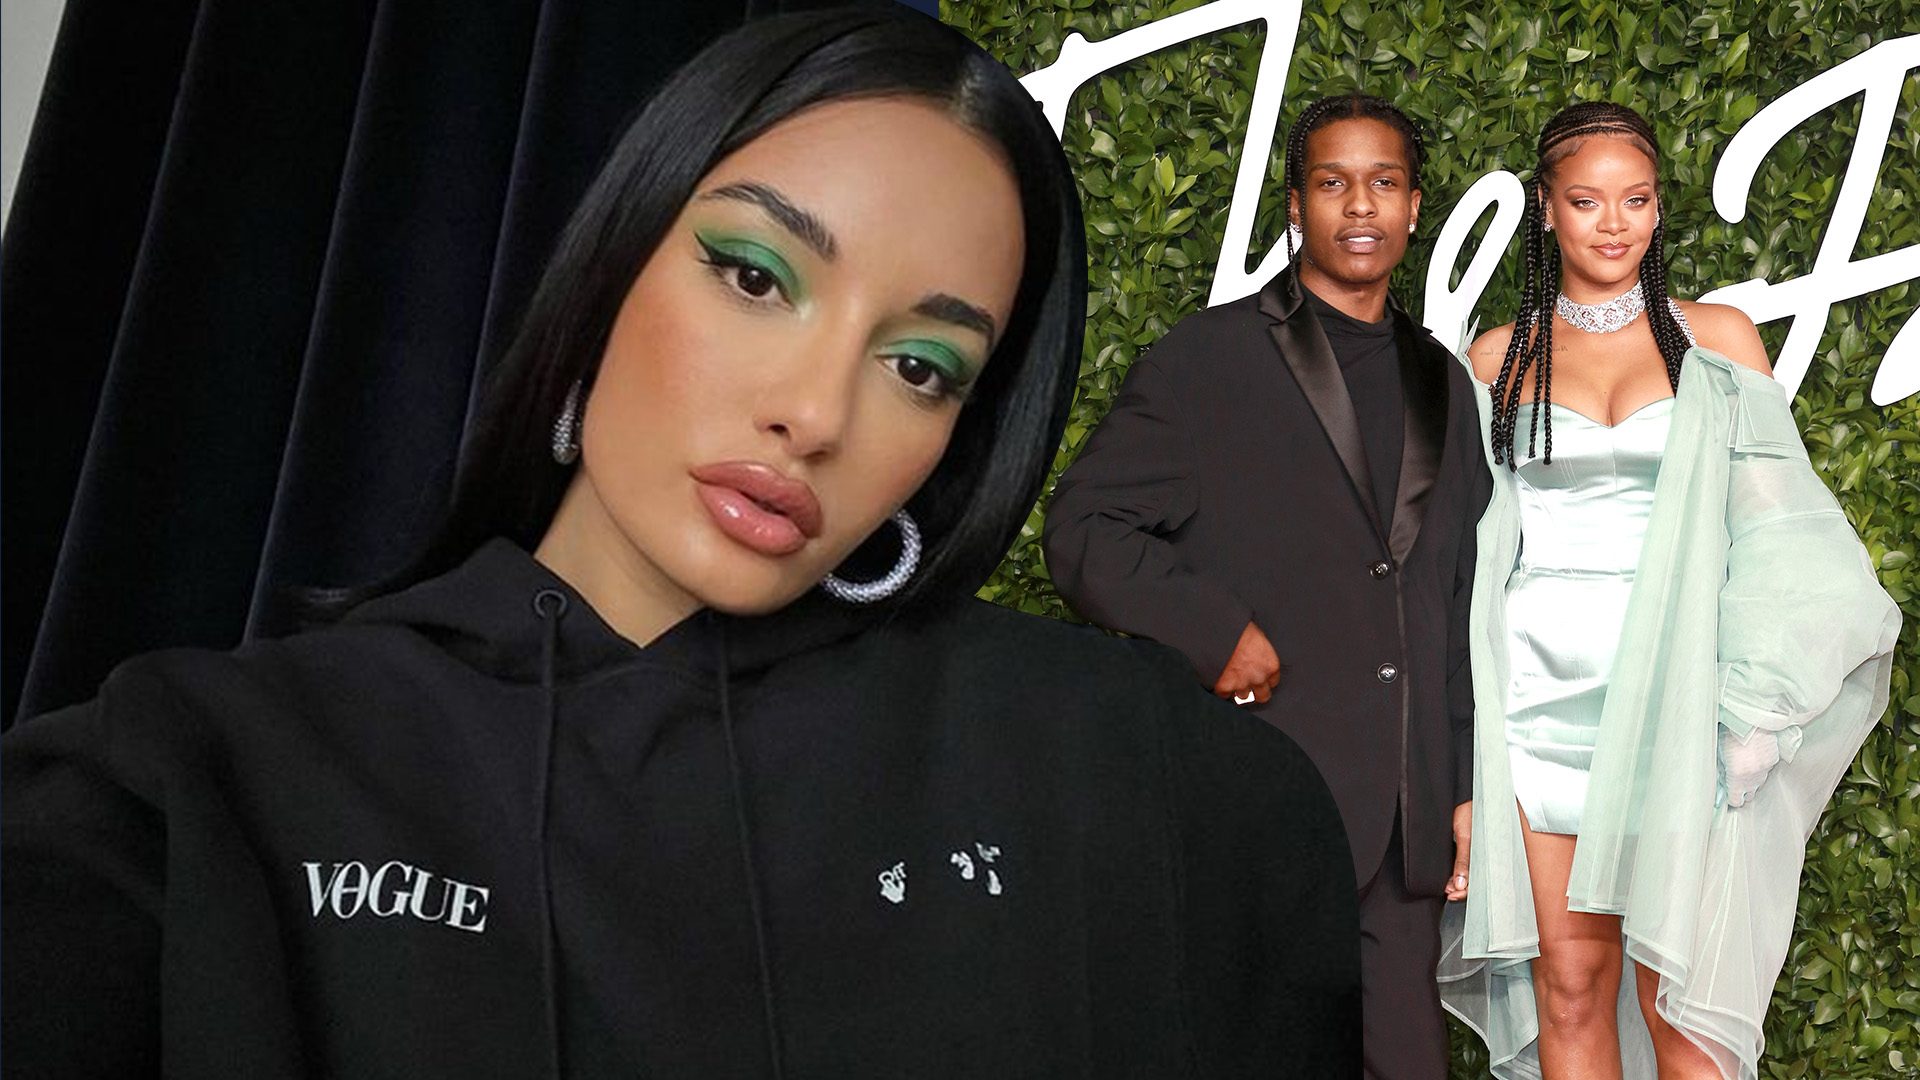 Rihanna and A$AP Rocky Rumored to Be Dating, Twitter Reacts